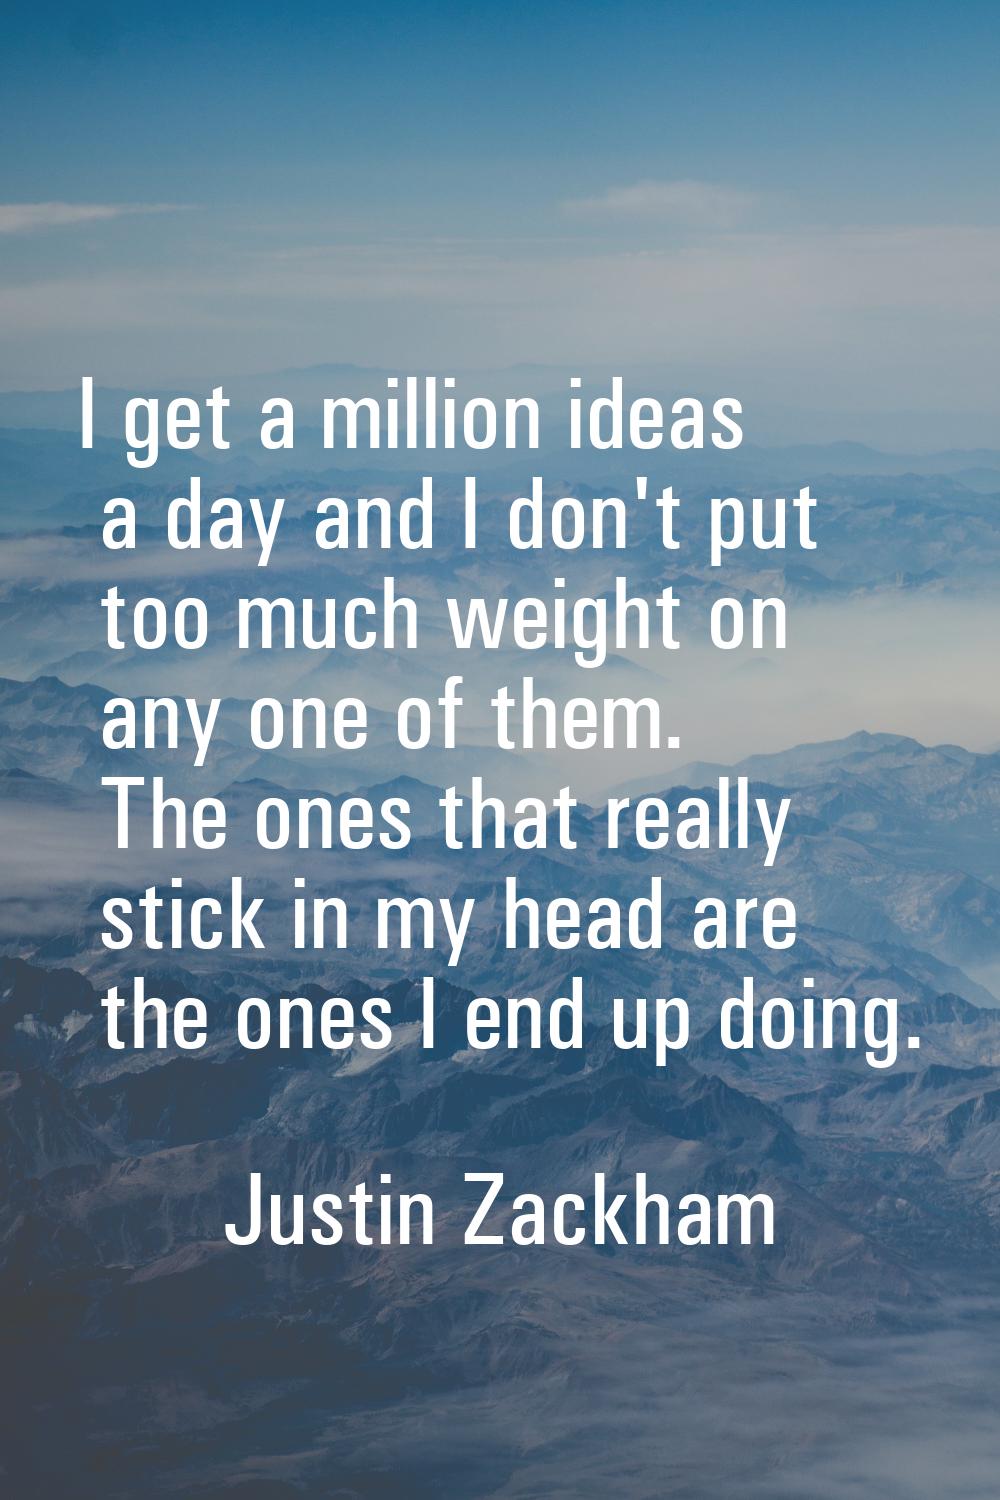 I get a million ideas a day and I don't put too much weight on any one of them. The ones that reall